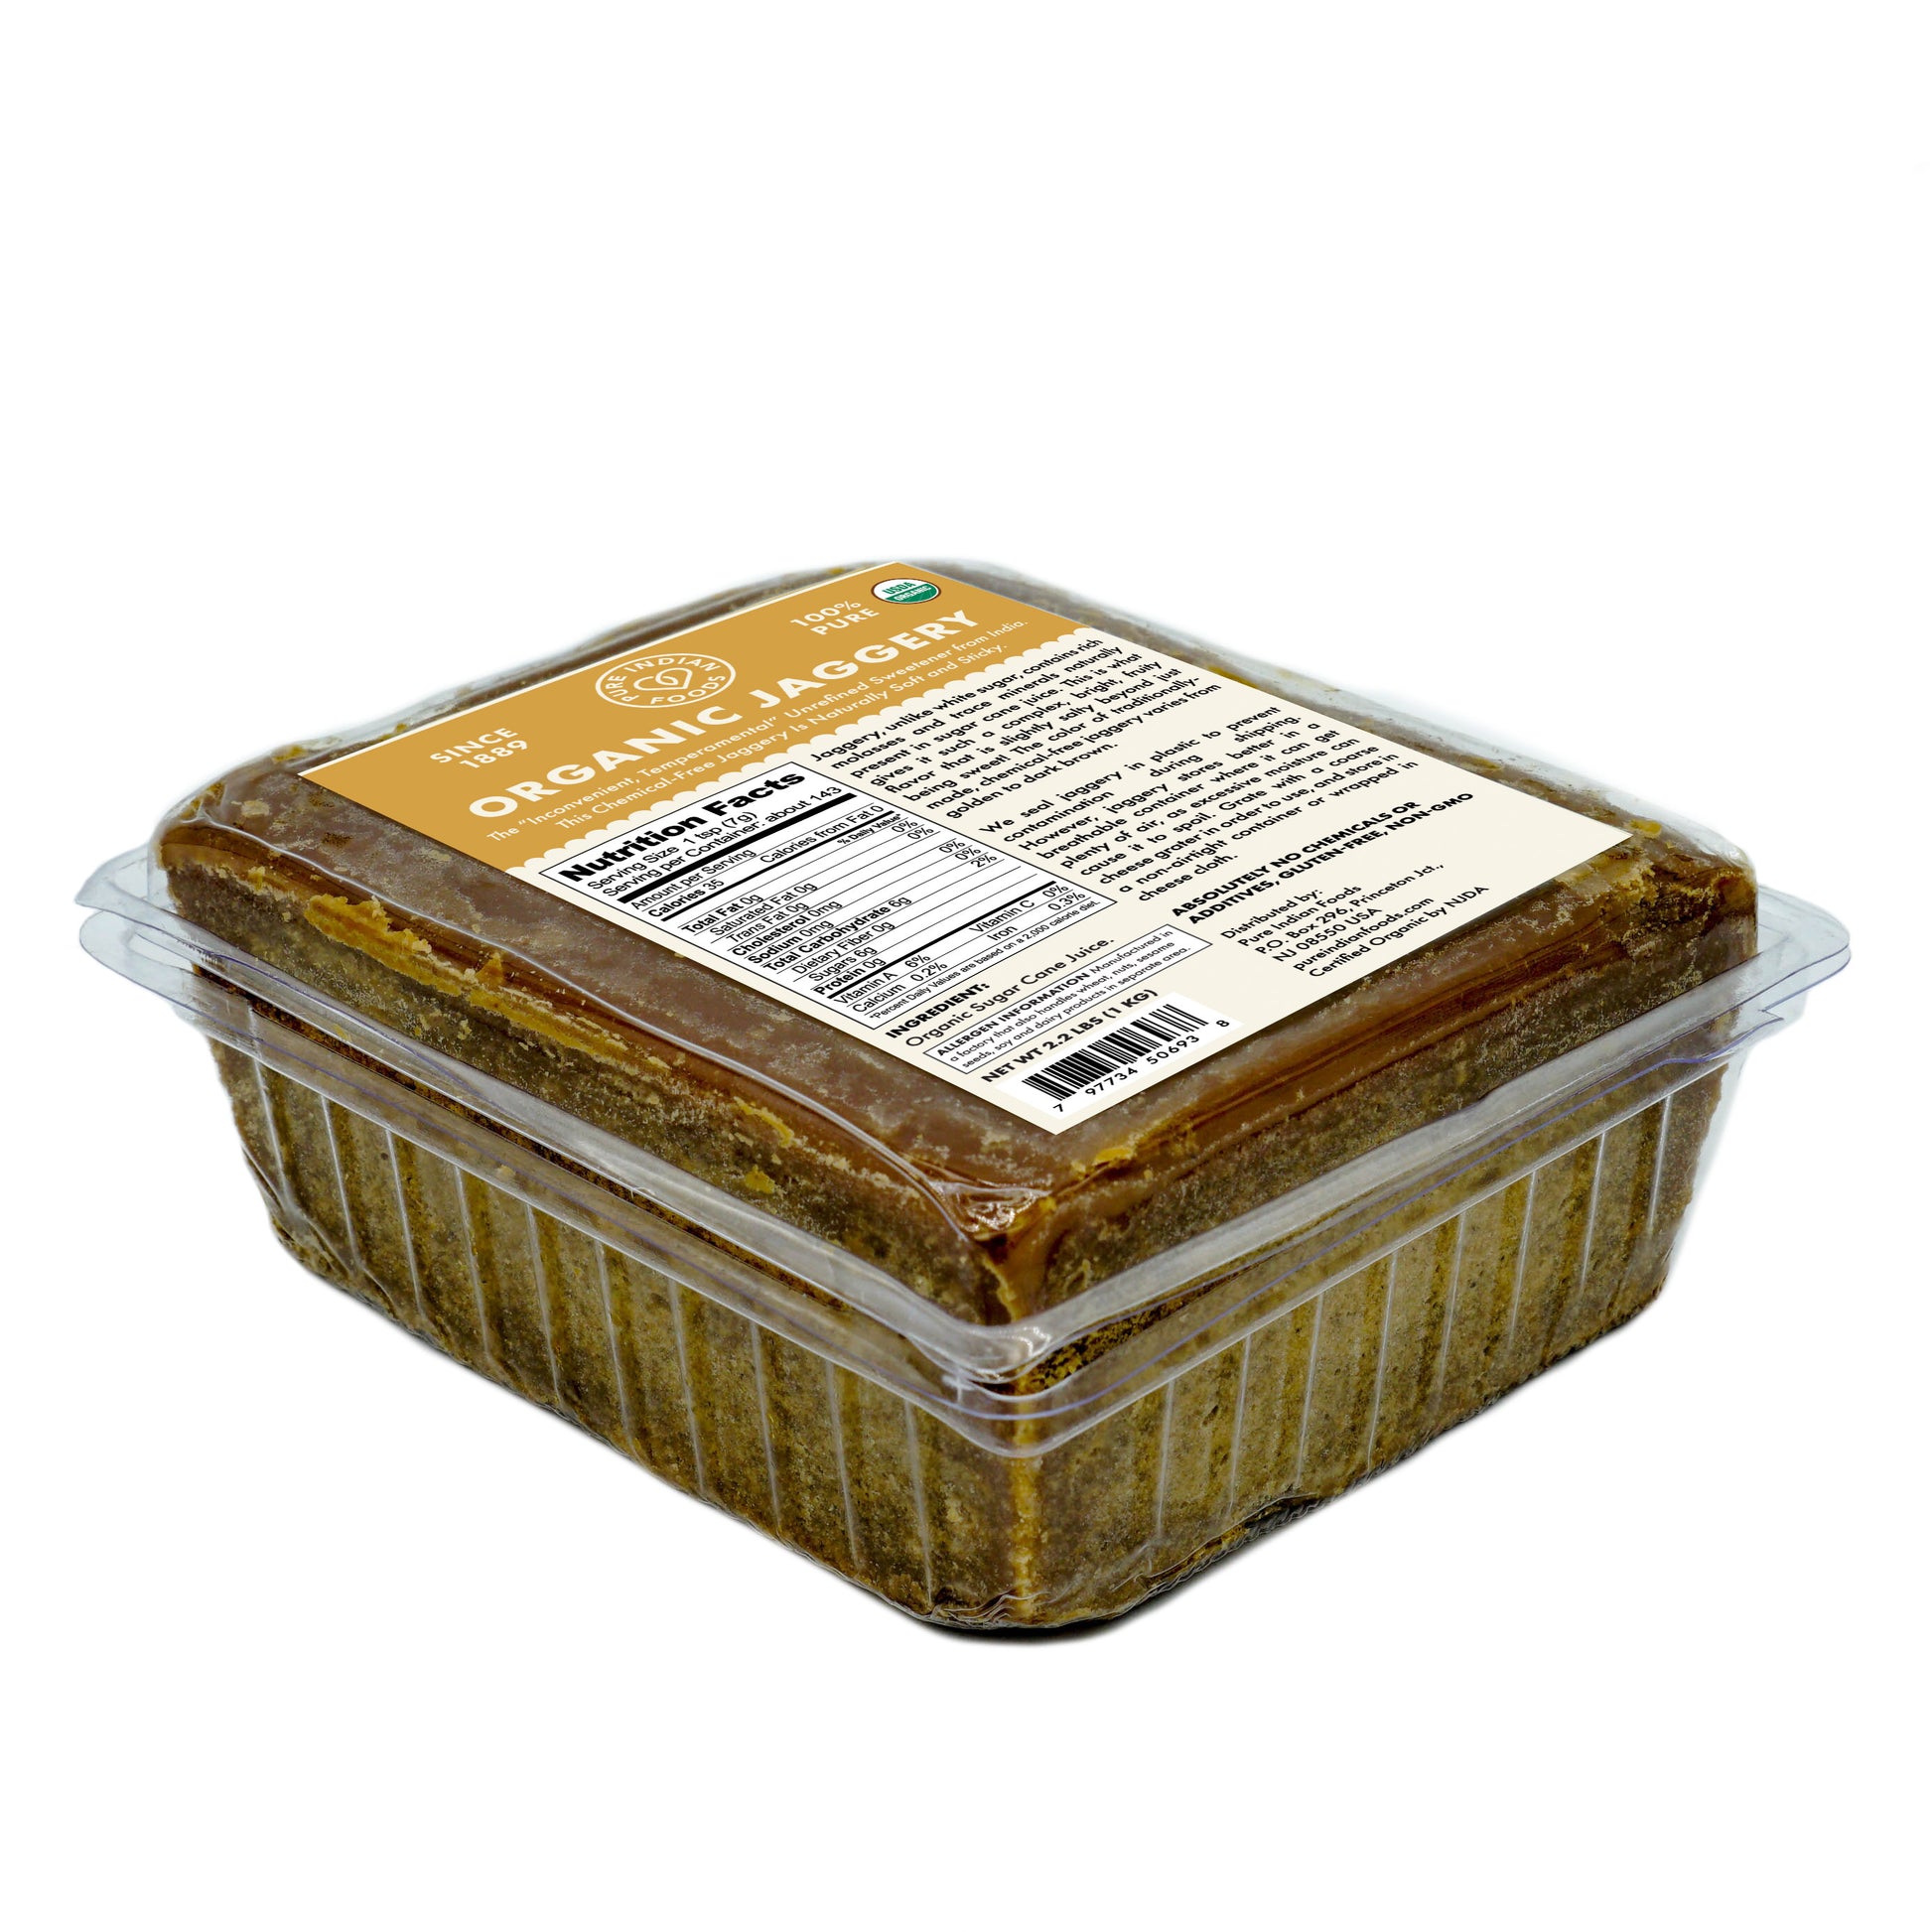 A package of Pure Indian Foods organic jaggery.